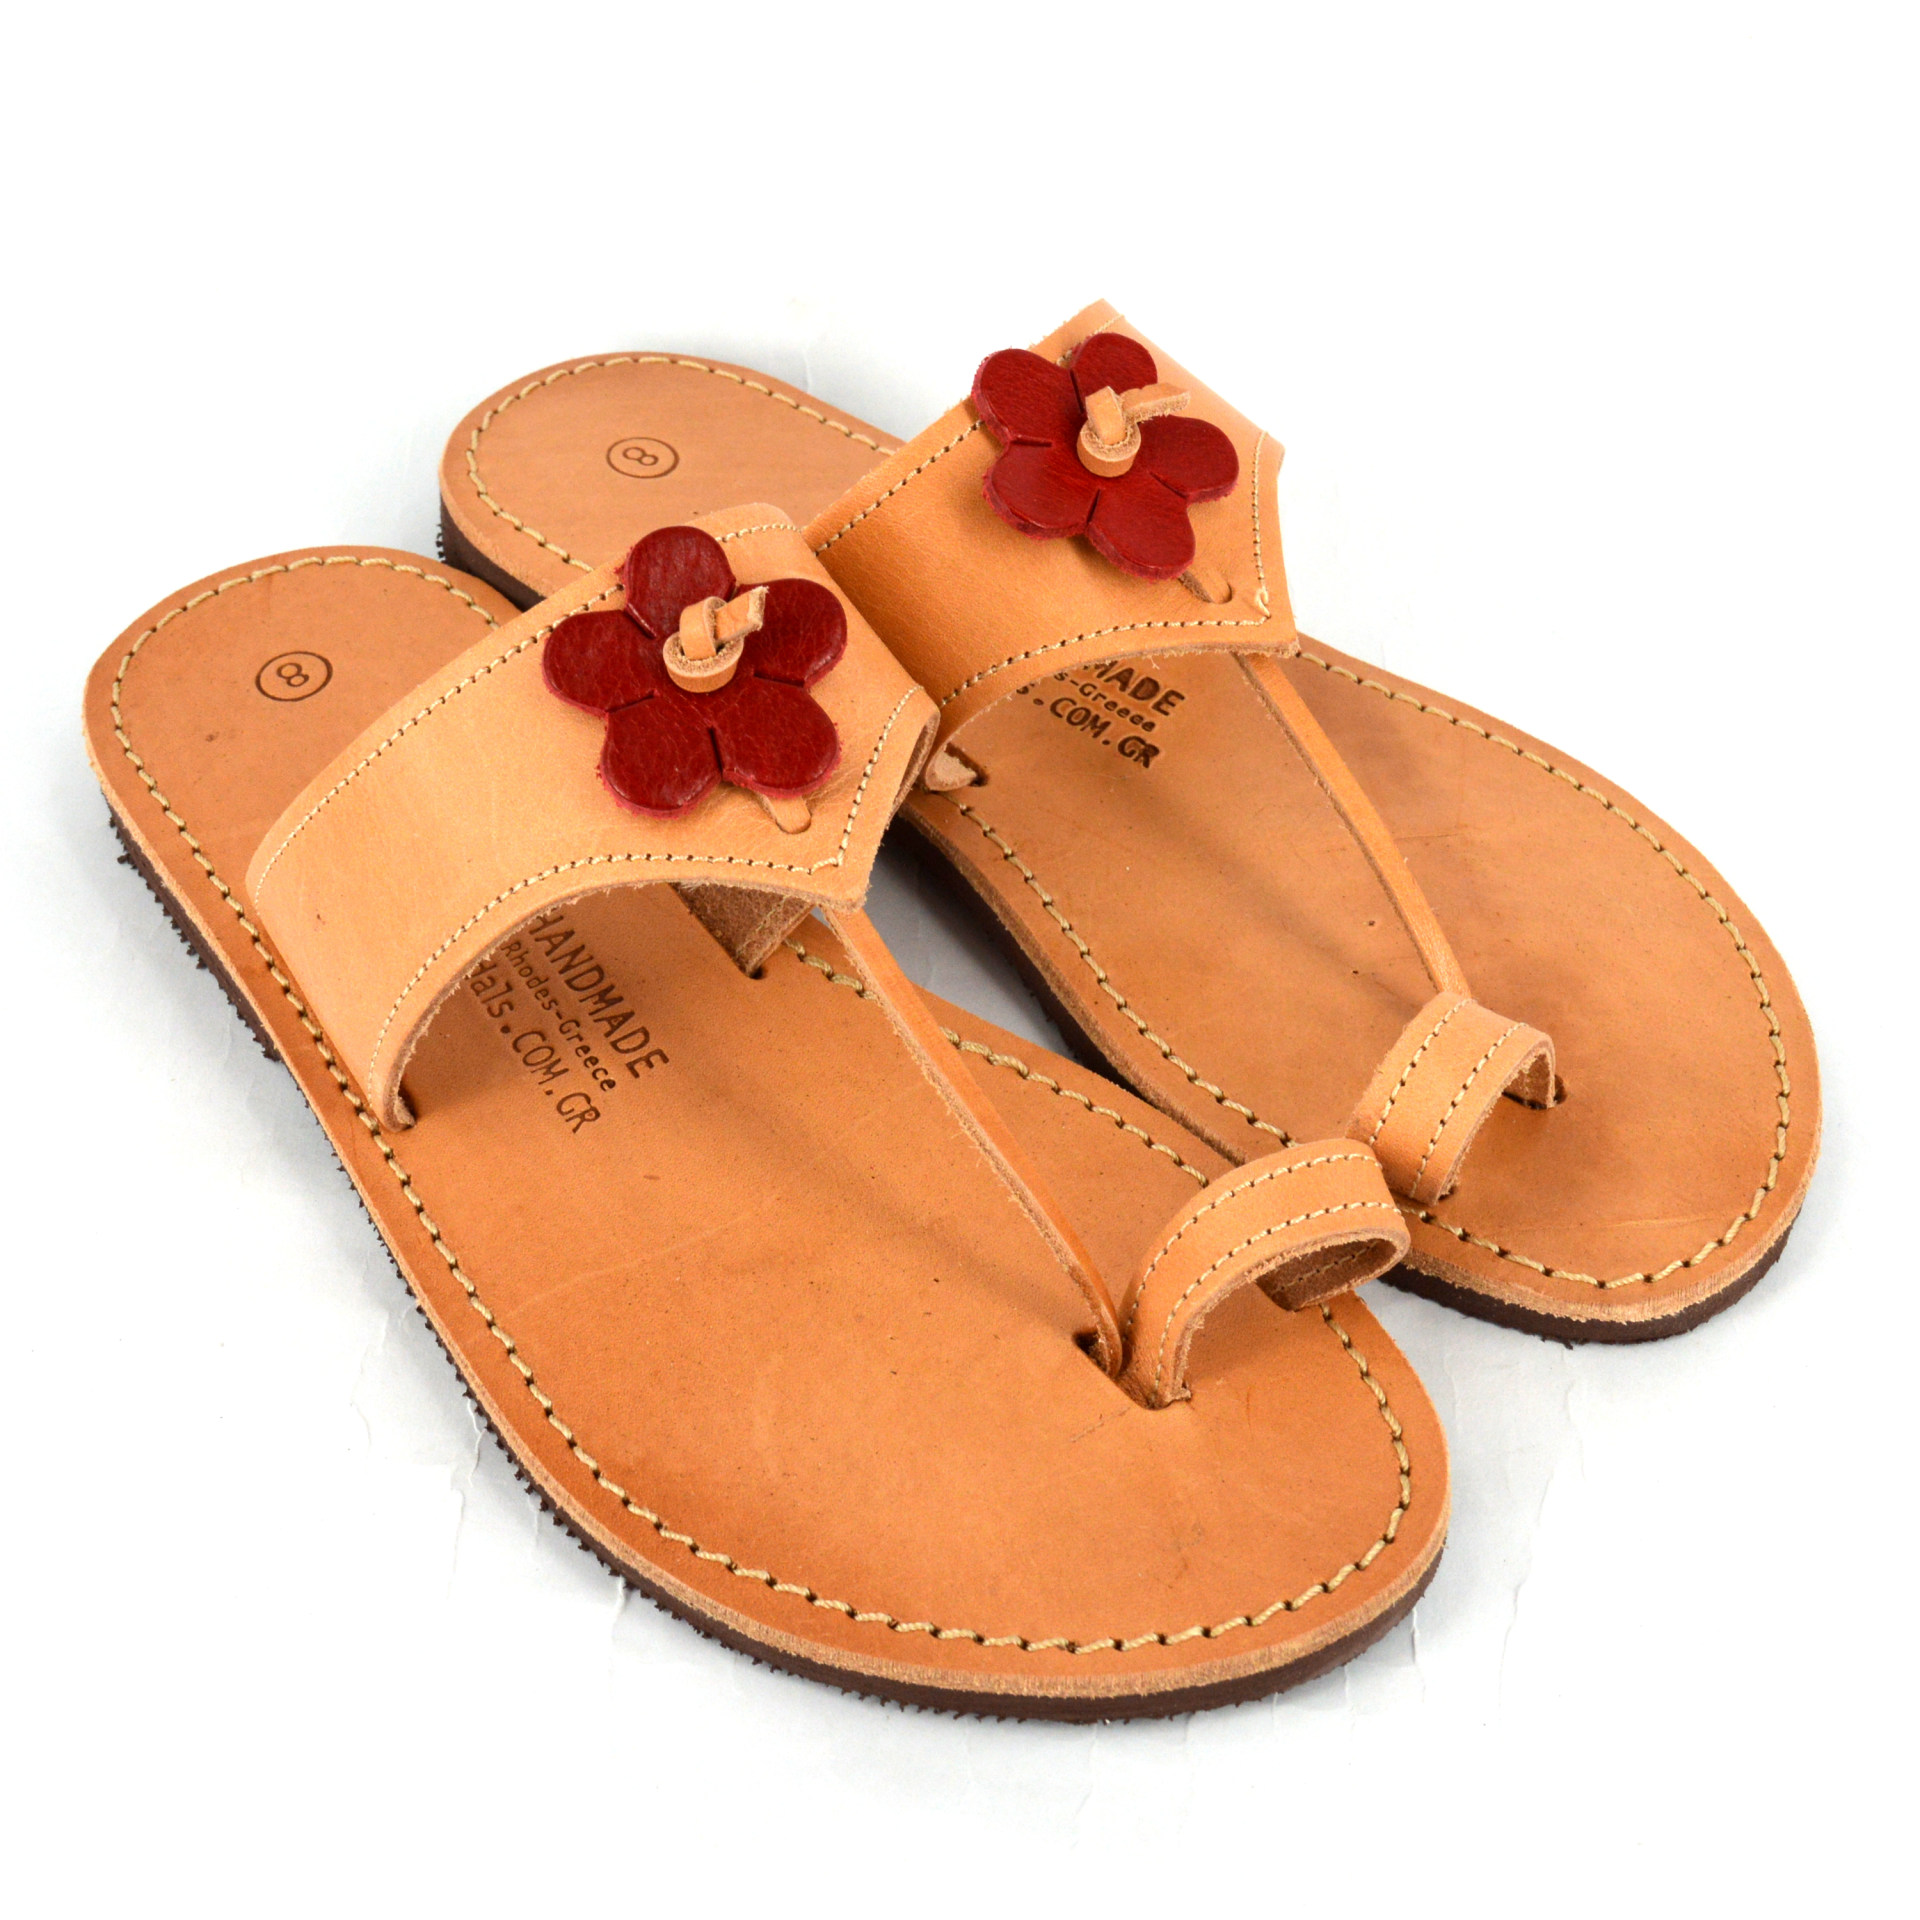 ROZA ROZA-2 - Hand Made Sandals in Greece - RodosSandals.com.gr